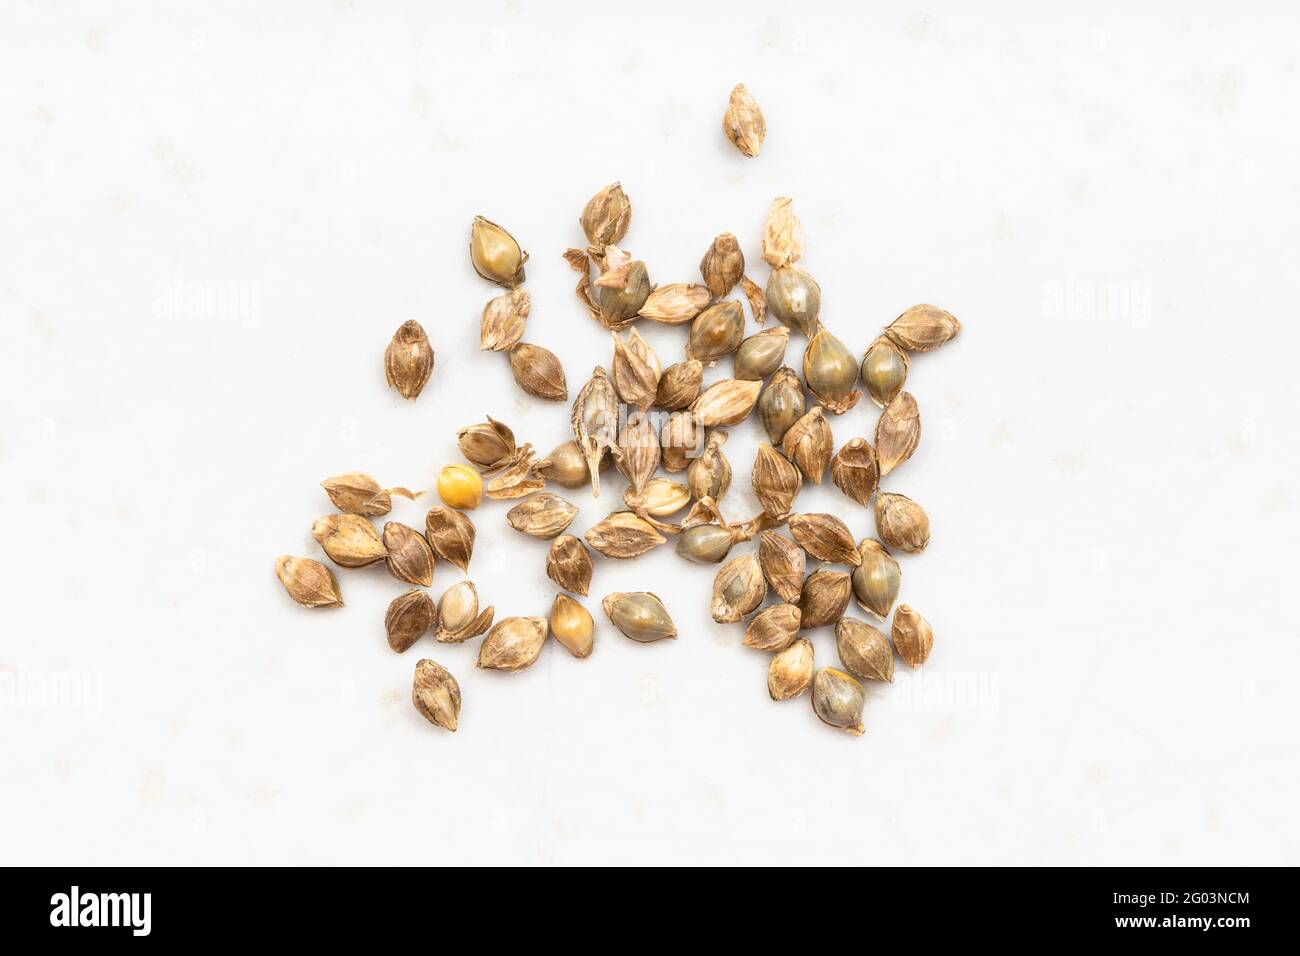 several whole-grain barnyard millet seeds close up on gray ceramic plate Stock Photo